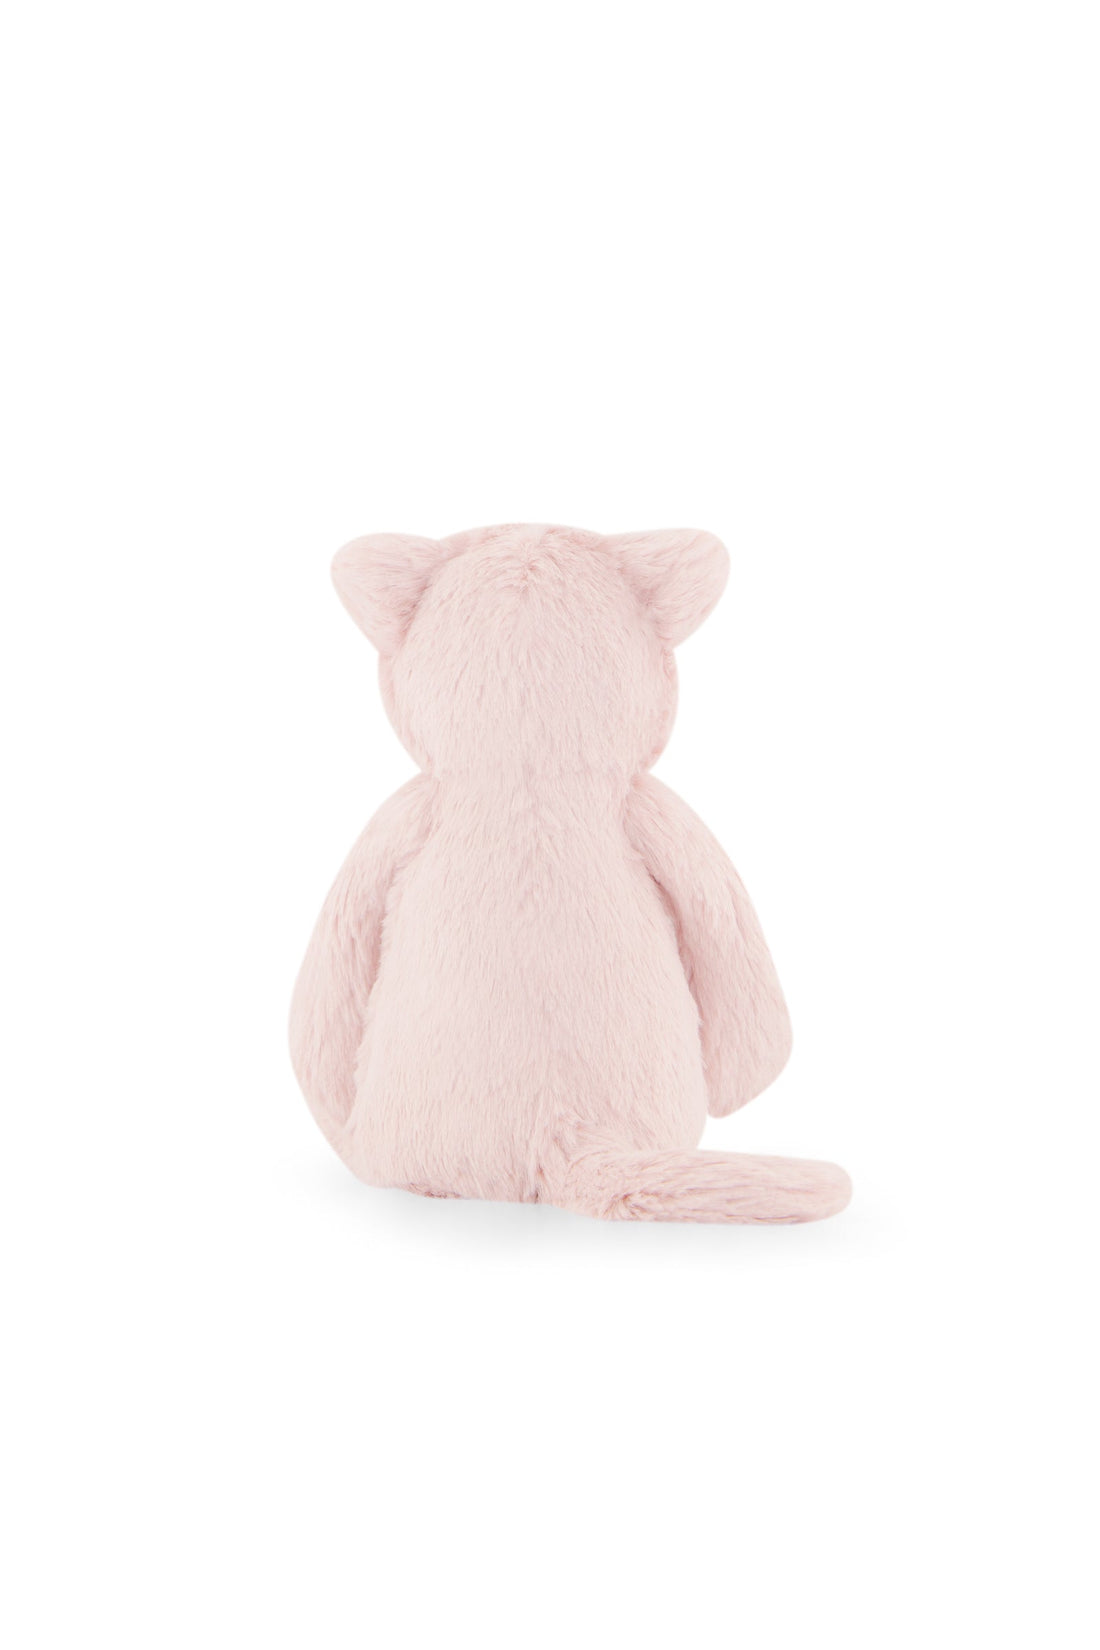 Snuggle Bunnies - Elsie the Kitty - Blush Childrens Toy from Jamie Kay USA